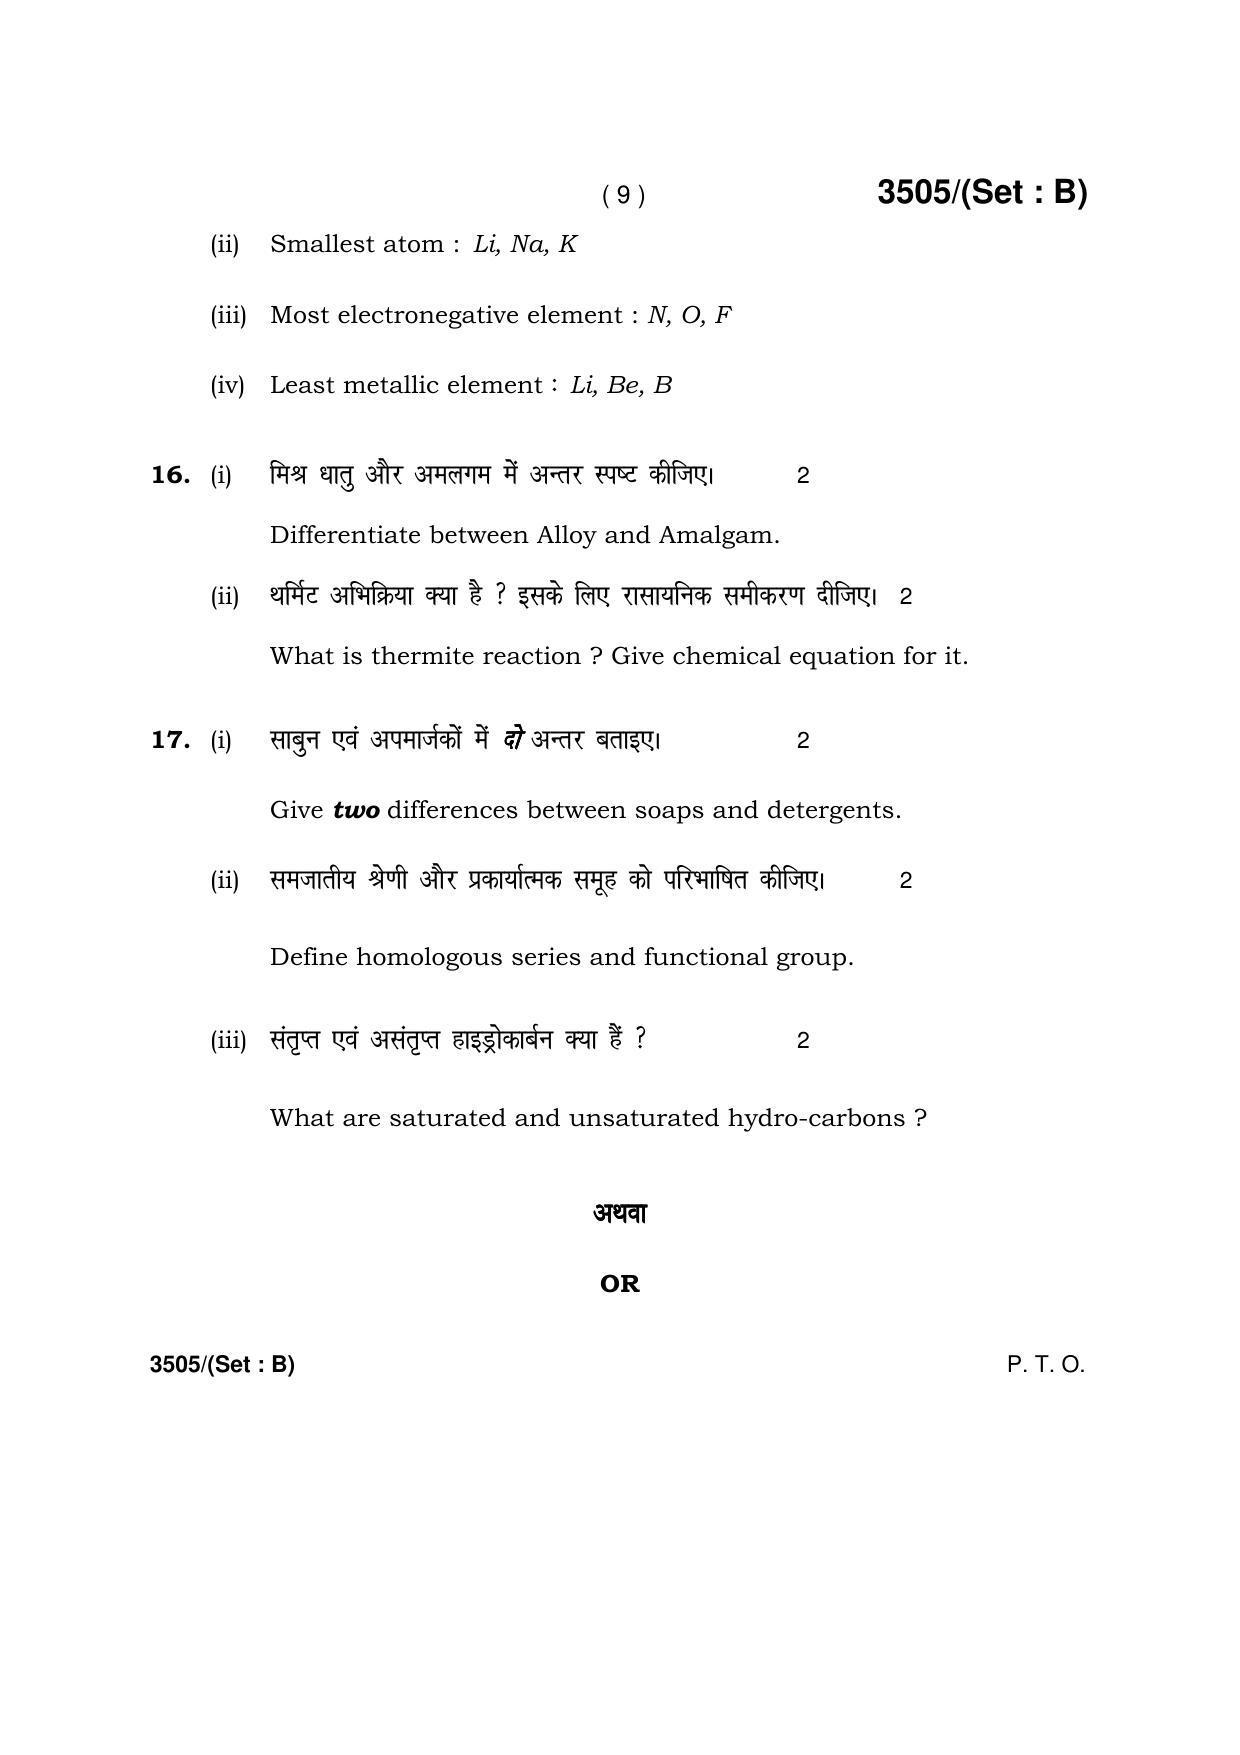 Haryana Board HBSE Class 10 Science -B 2018 Question Paper - Page 9